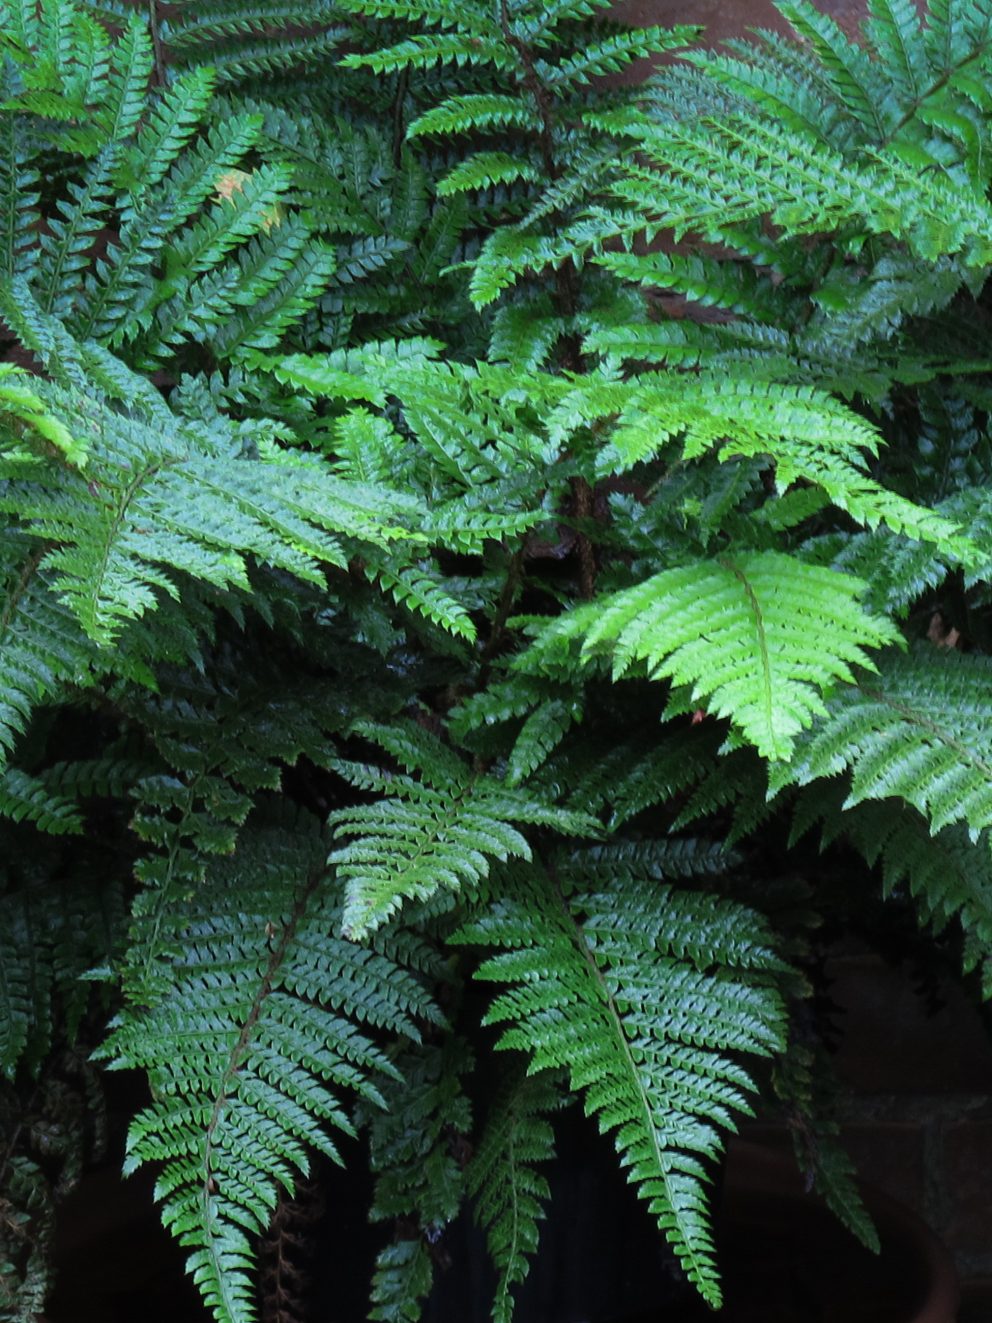 Lush and shiny, these are some really good-looking ferns.